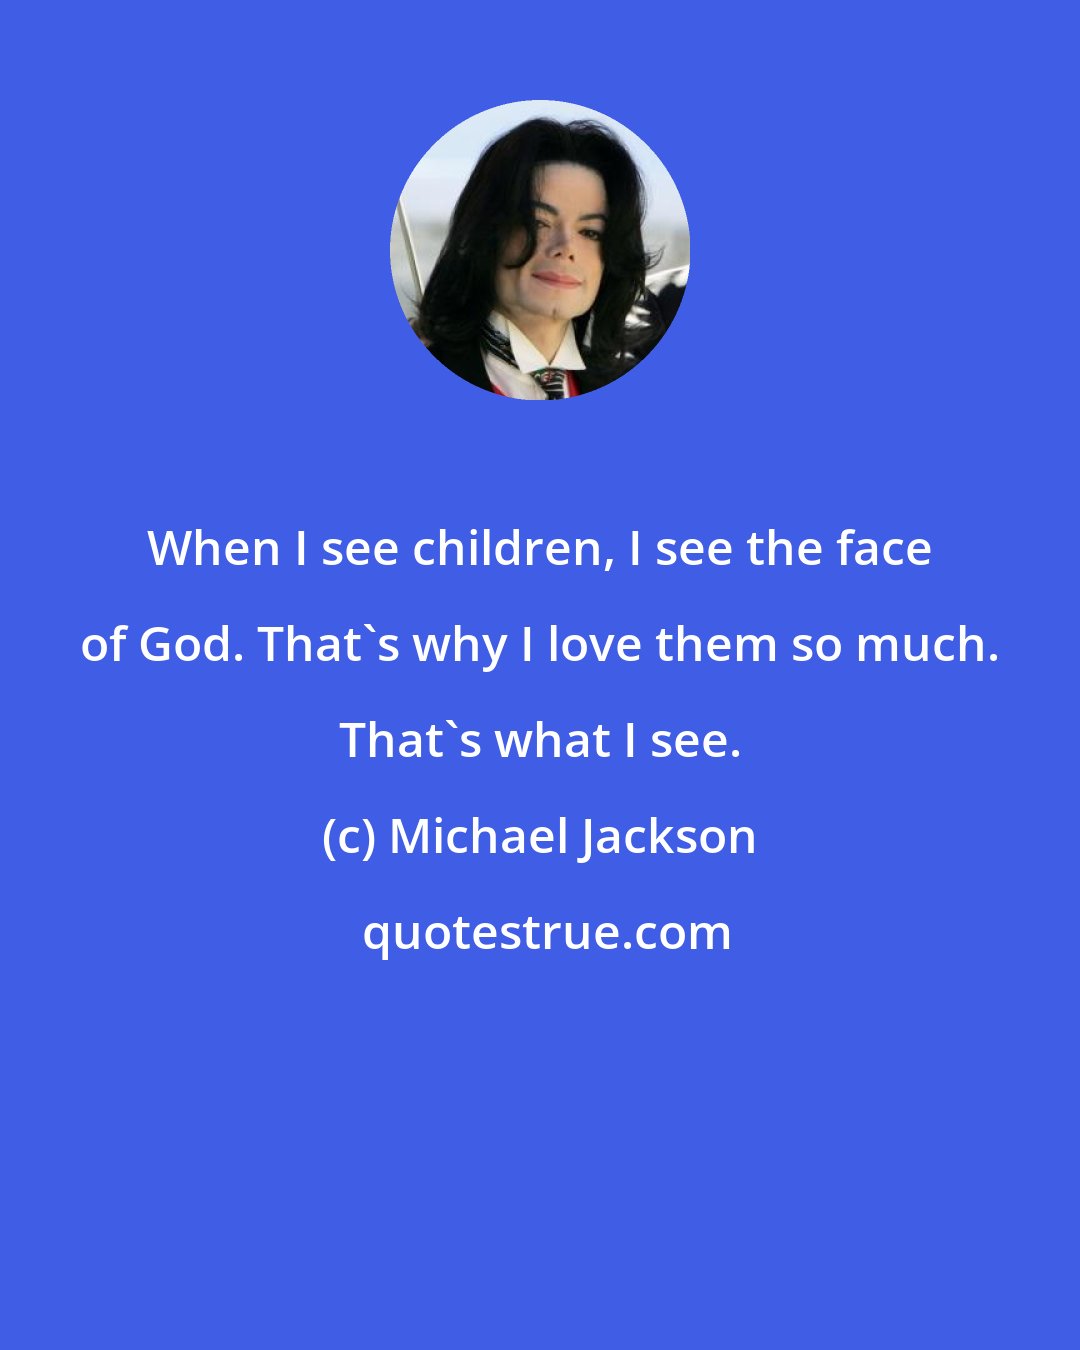 Michael Jackson: When I see children, I see the face of God. That's why I love them so much. That's what I see.